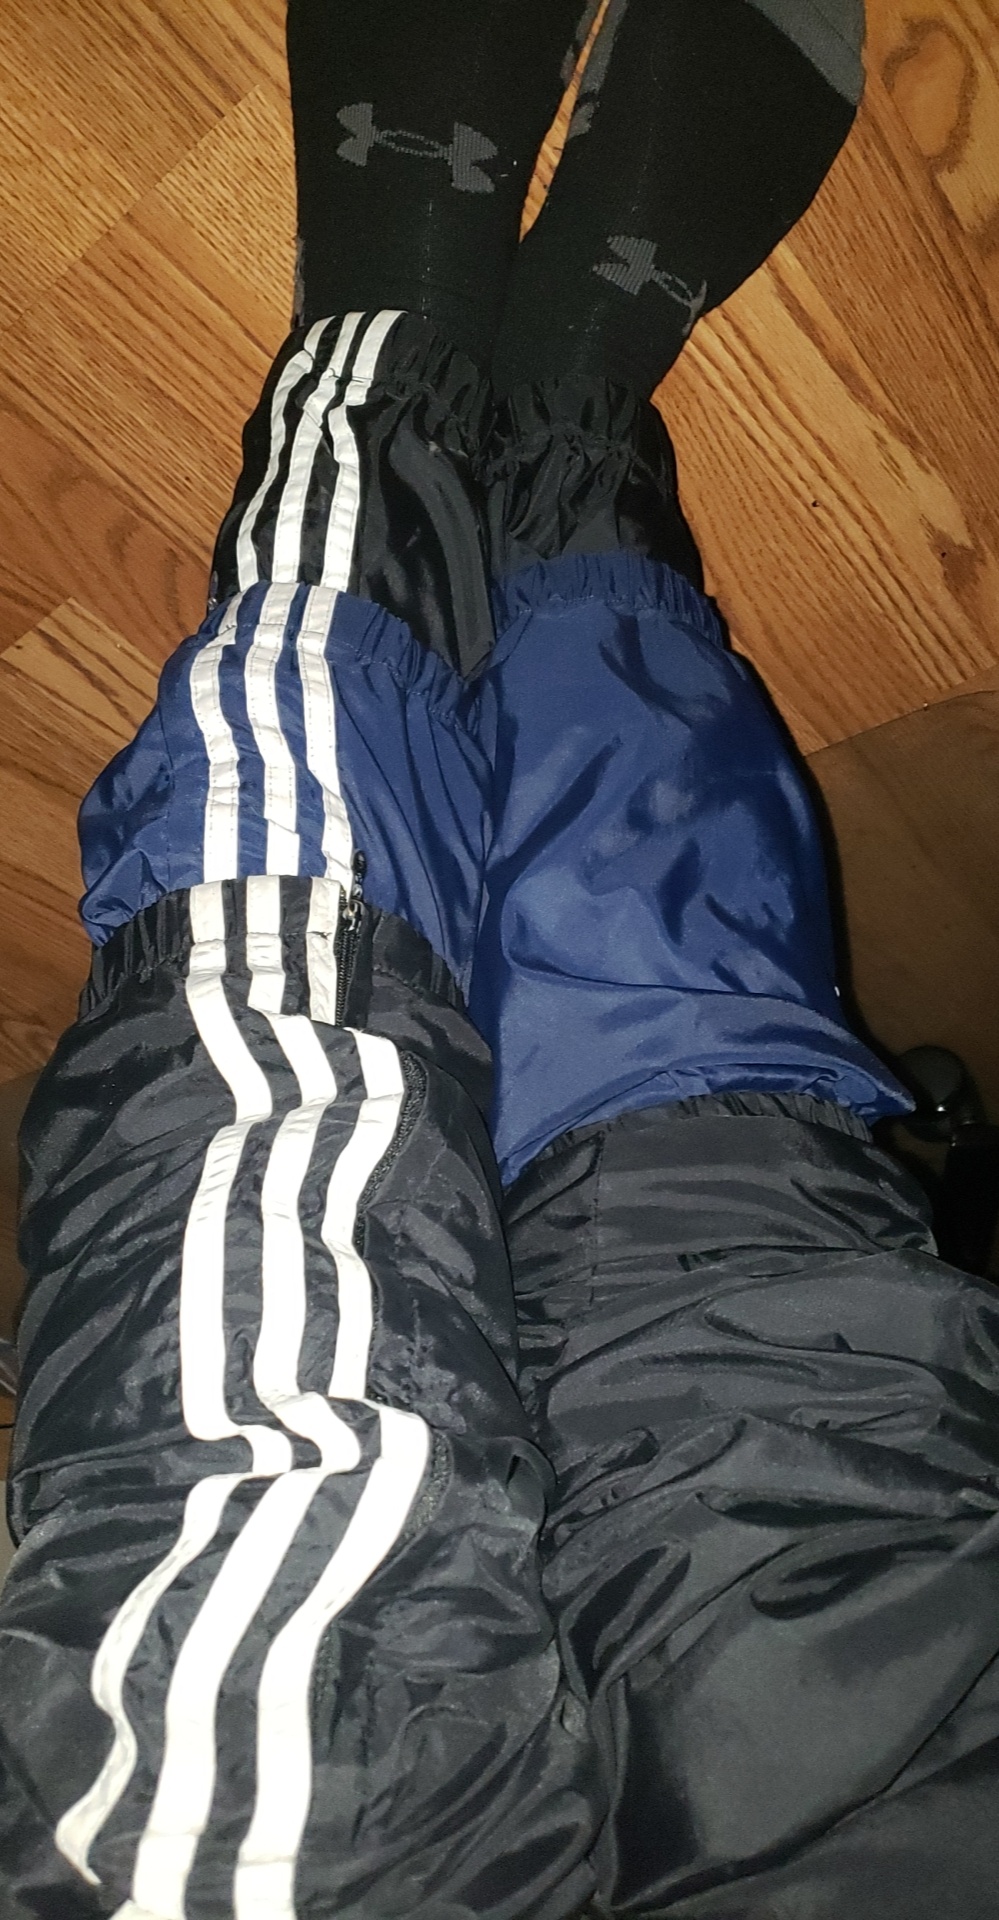 3 layers of 3-stripes pants